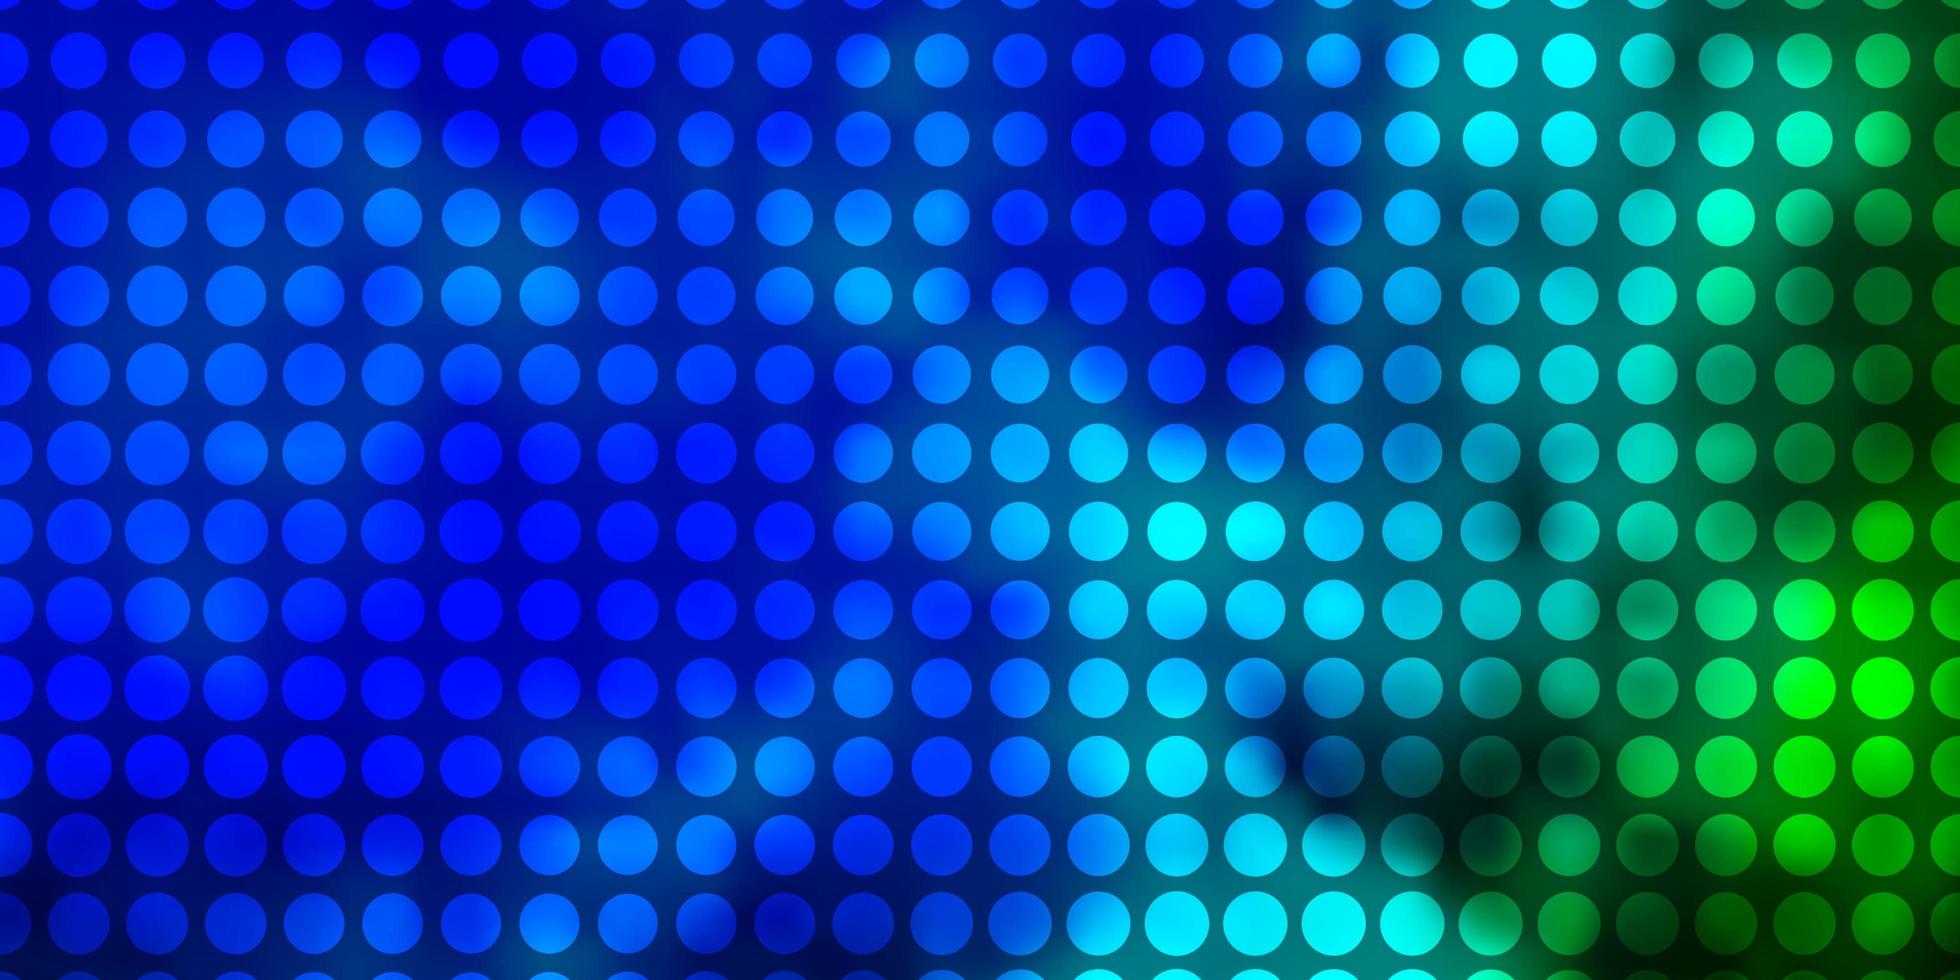 Light Blue, Green vector pattern with circles